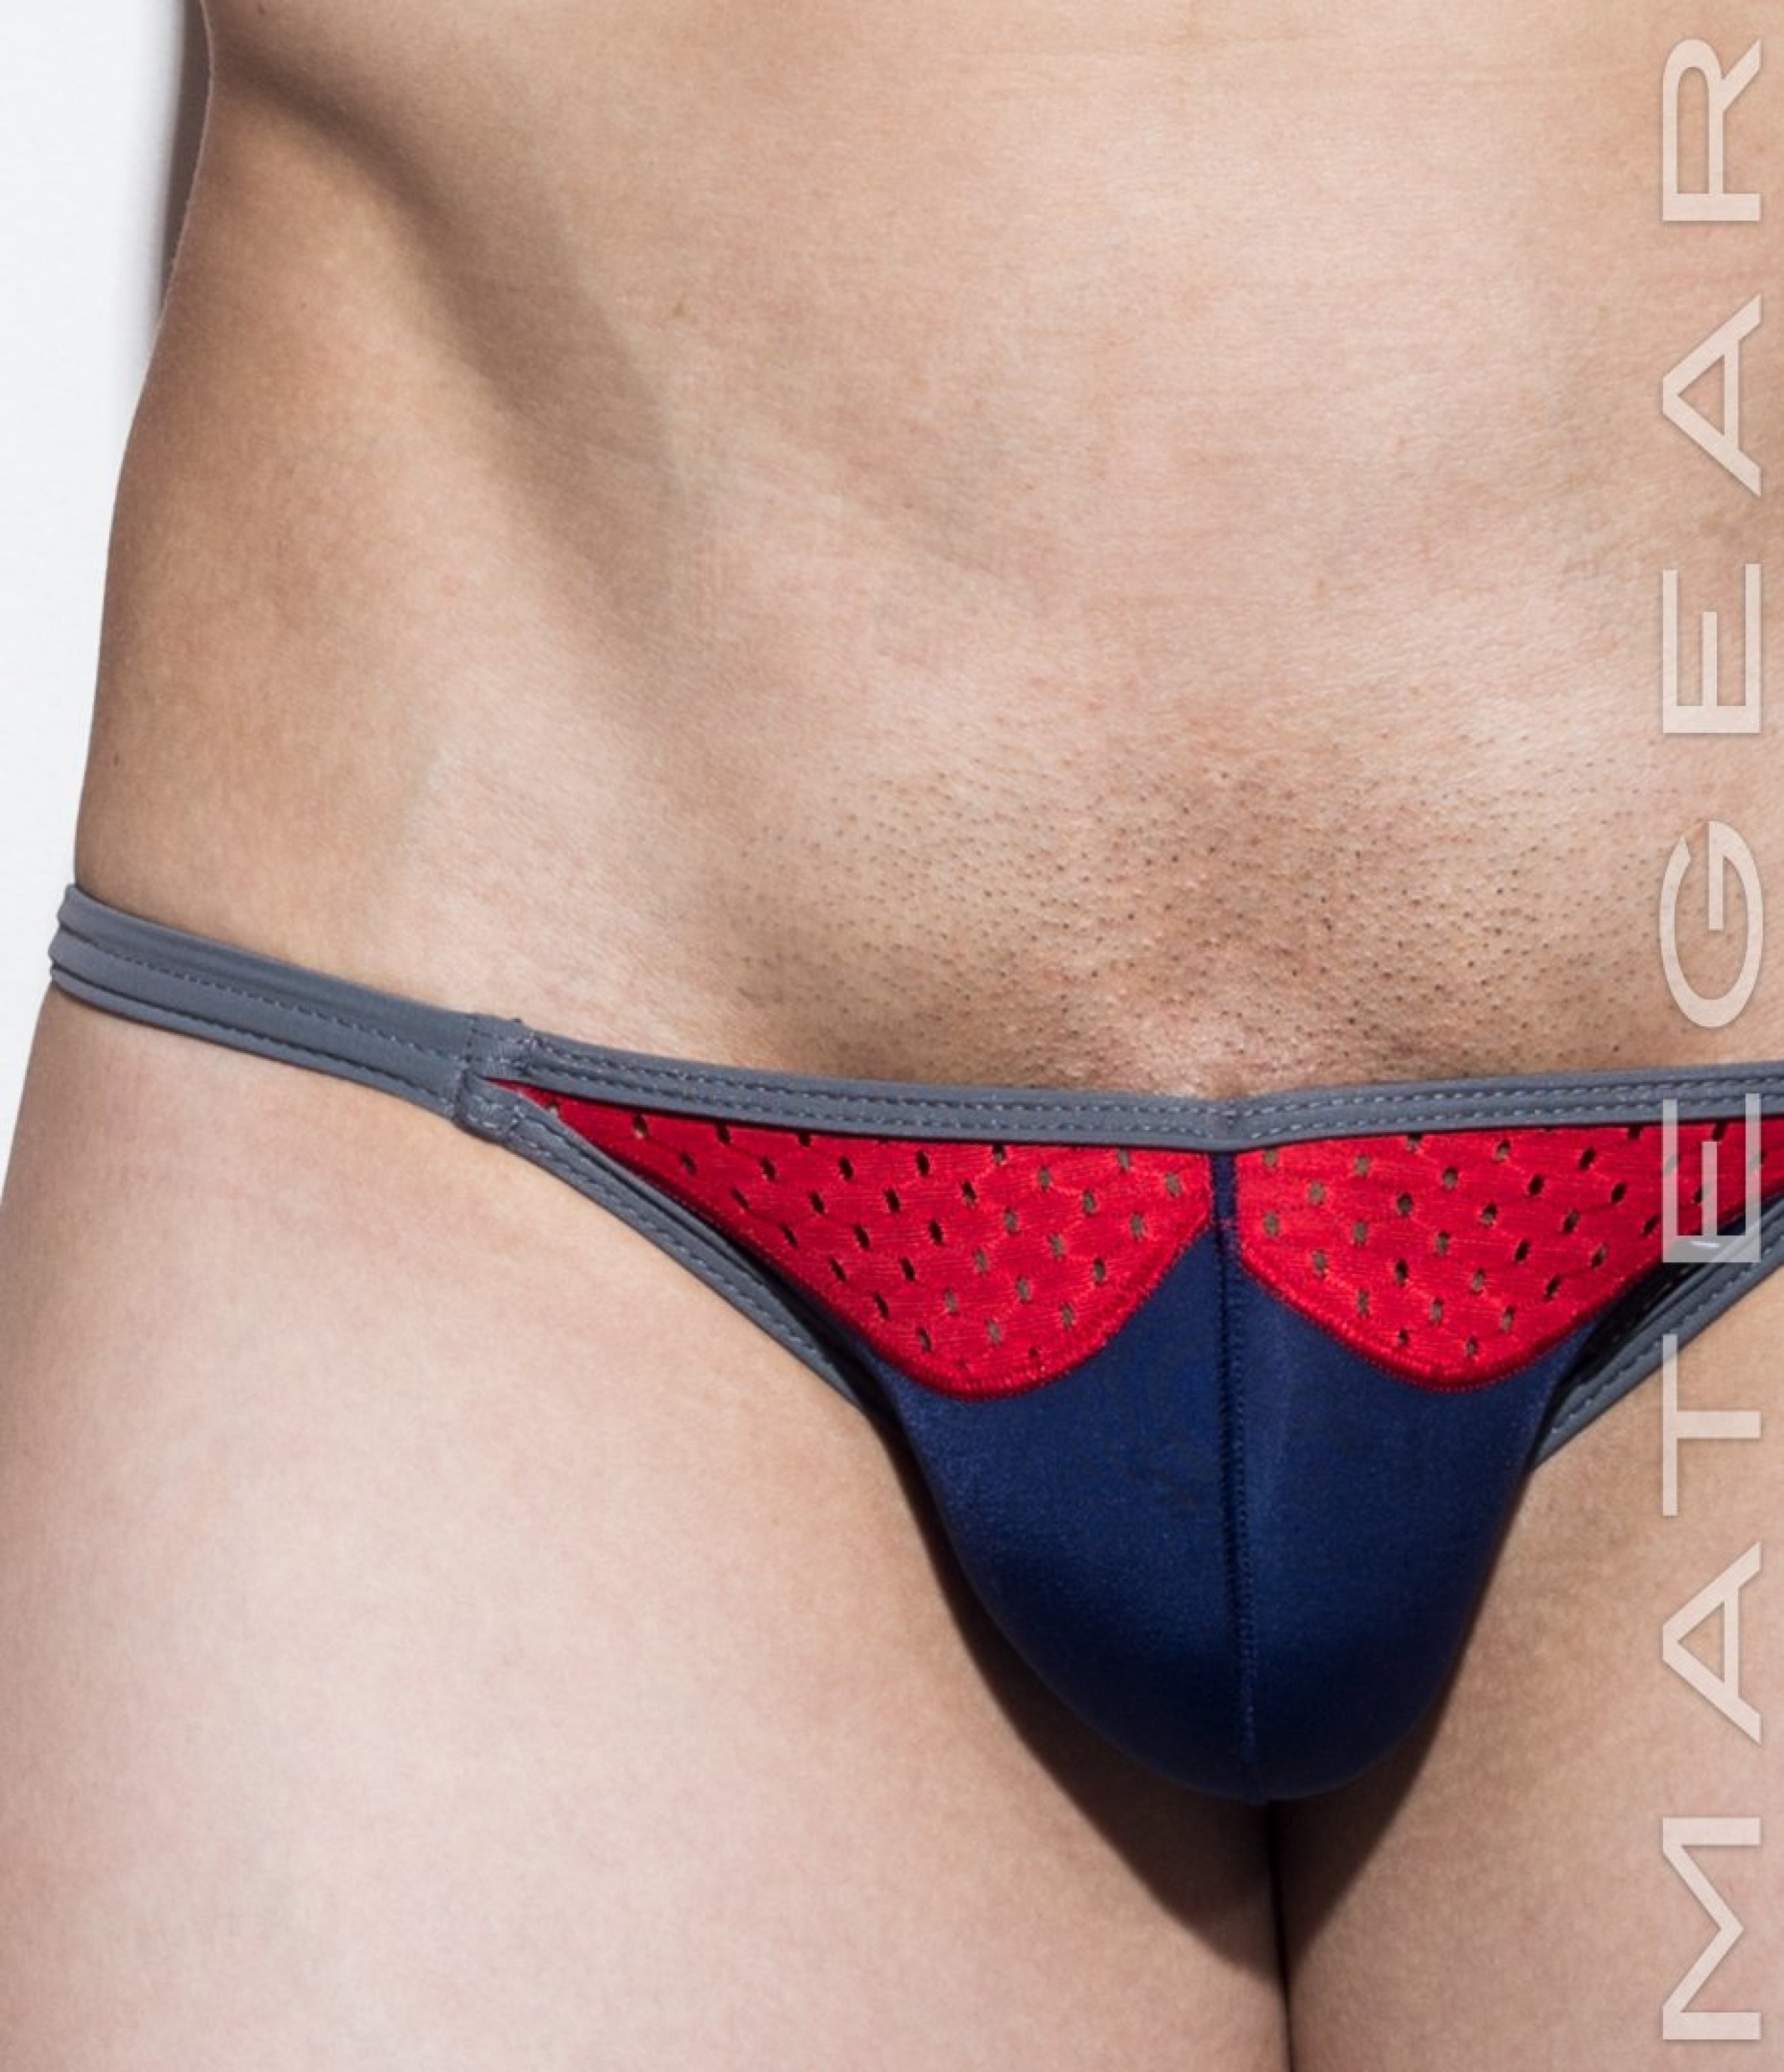 Sexy Men's Underwear Extremely Sexy Mini Jock - Tae Woo - MATEGEAR - Sexy Men's Swimwear, Underwear, Sportswear and Loungewear